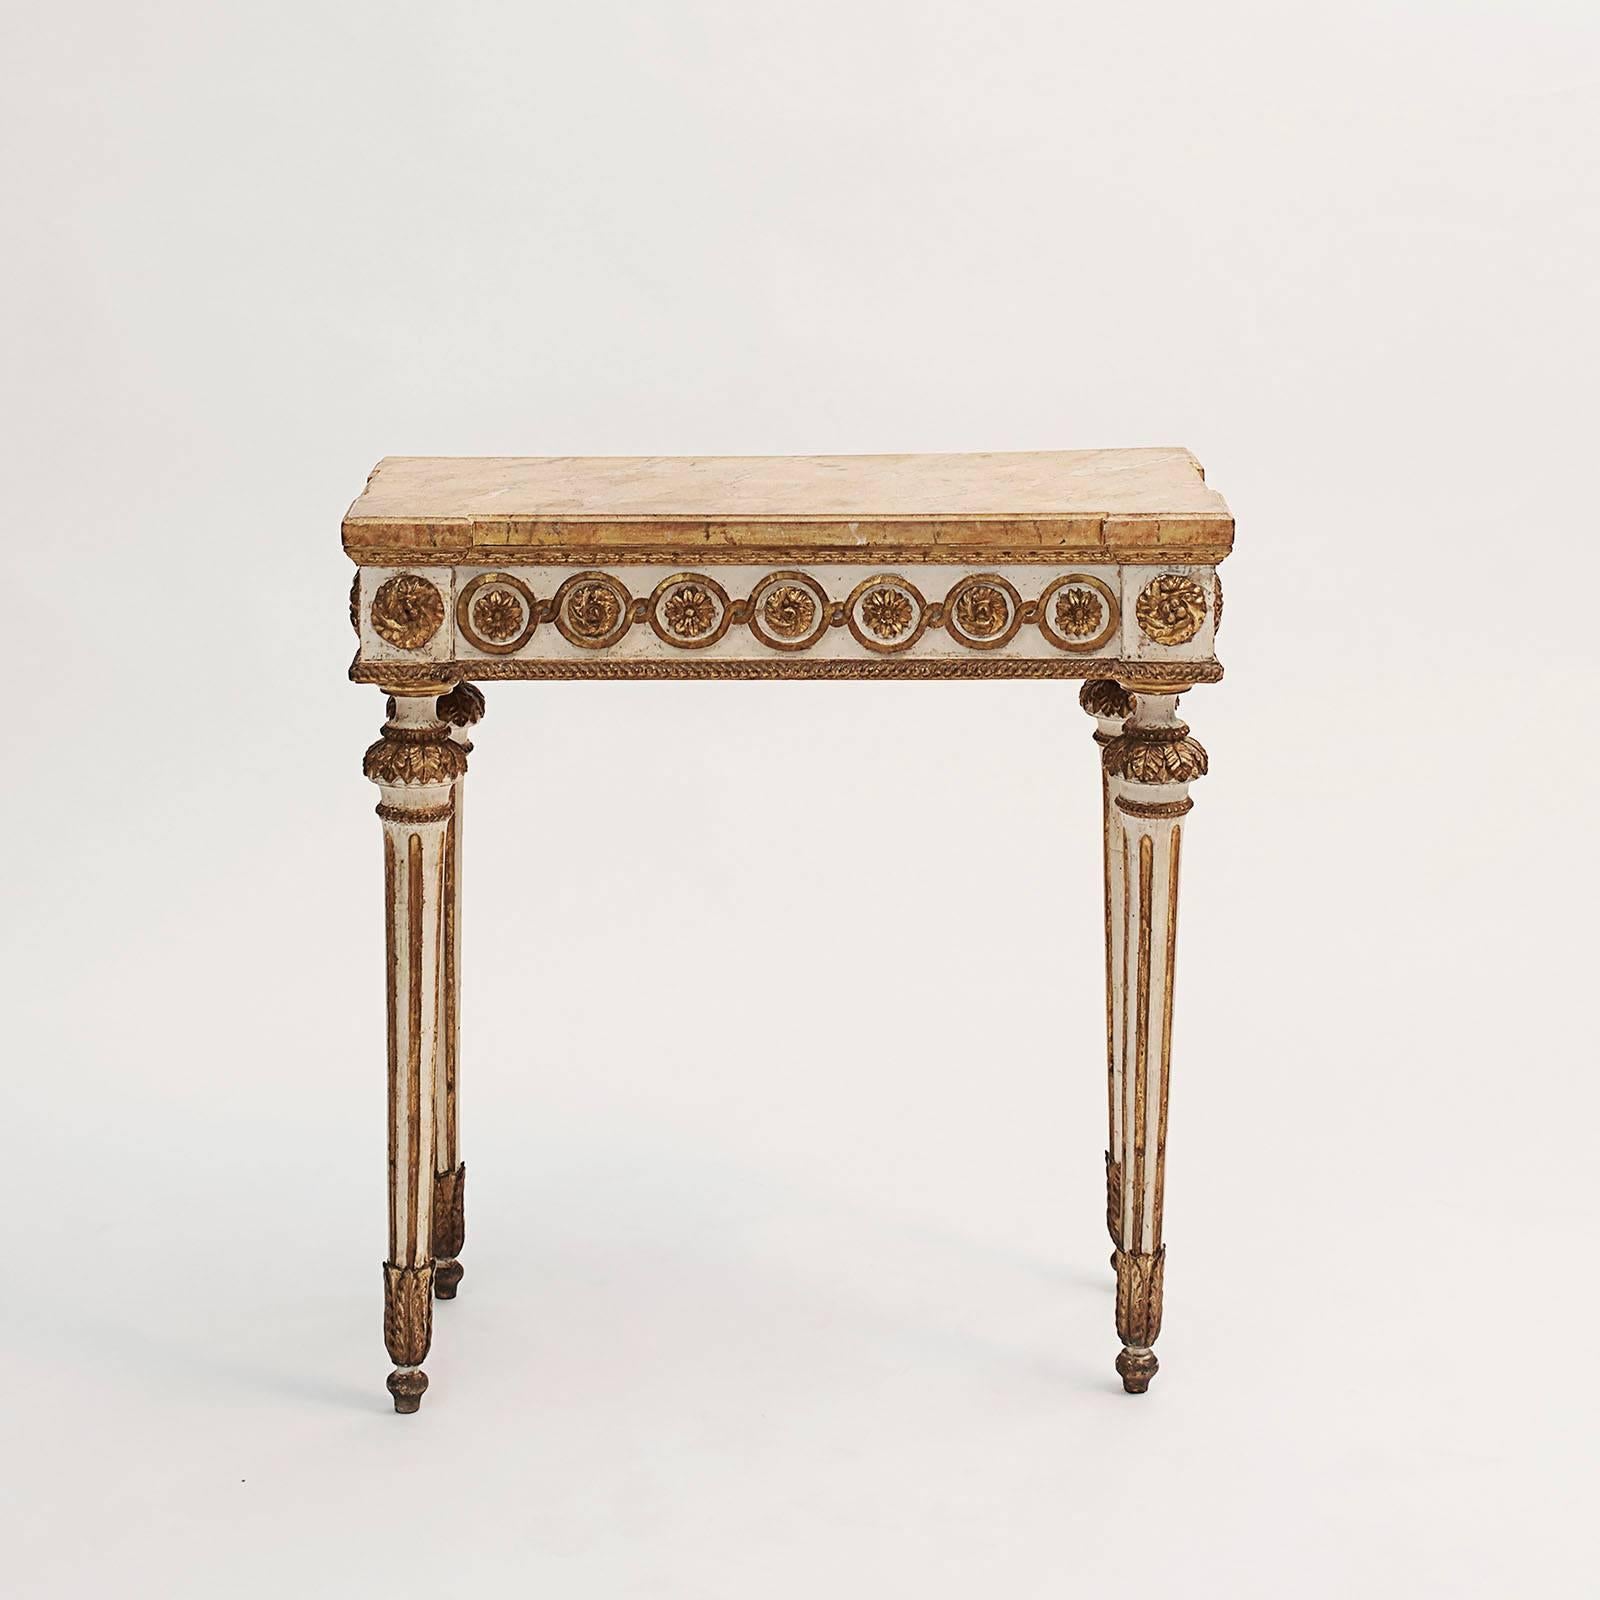 A fine pair of Italian neoclassical carved, painted and gilded consoles, late 18th century. 
The rectangular travertine style painted top with extended corners above a painted frieze decorated with carved circles and rosettes, raised on circular